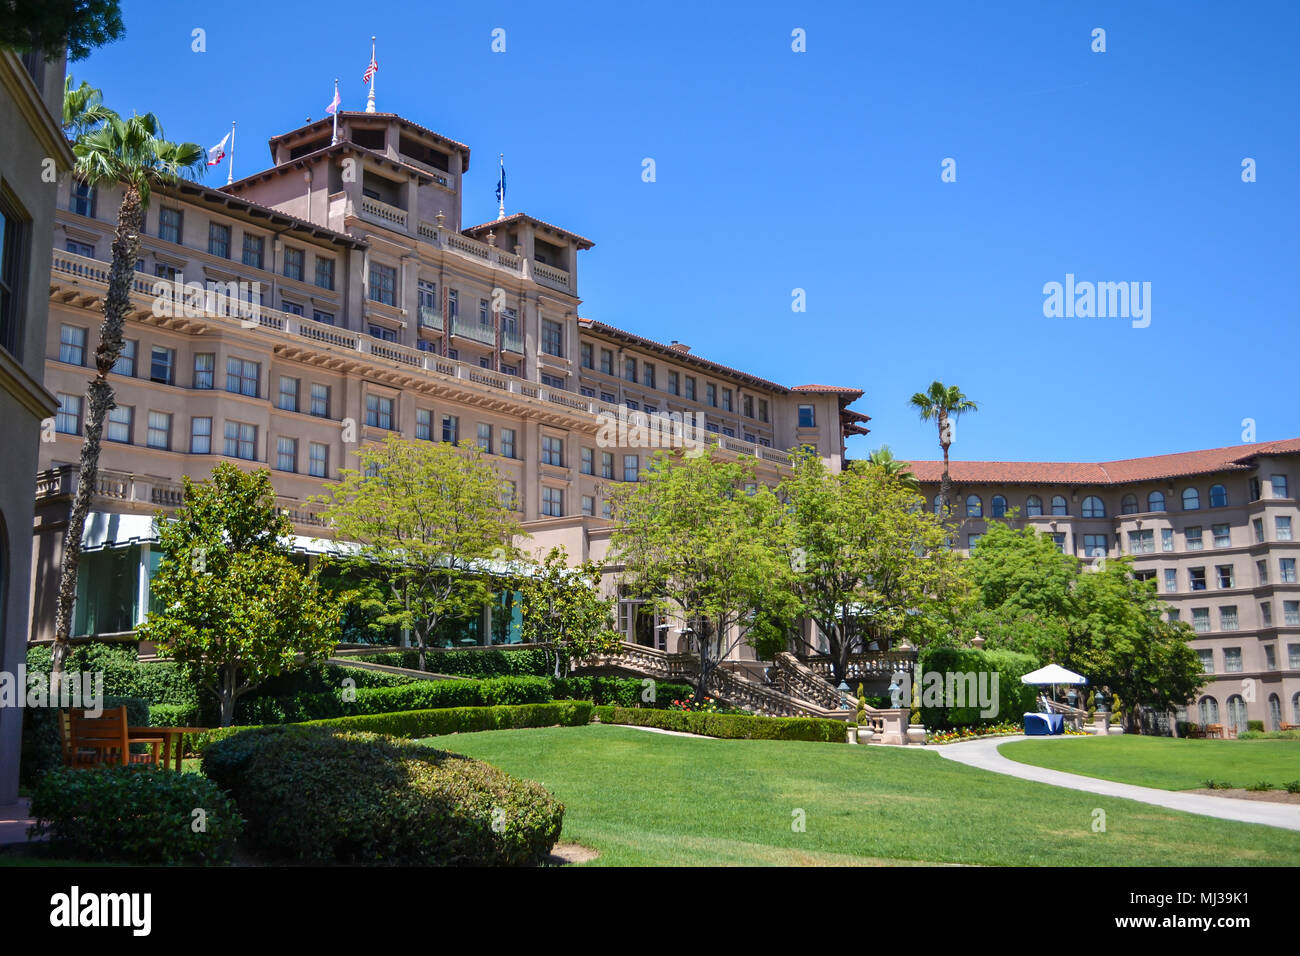 Visit Historic Downtown Pasadena California, home to Hollywood stars. The Langham Hotel provides luxury accomodations, downtown vibe Stock Photo